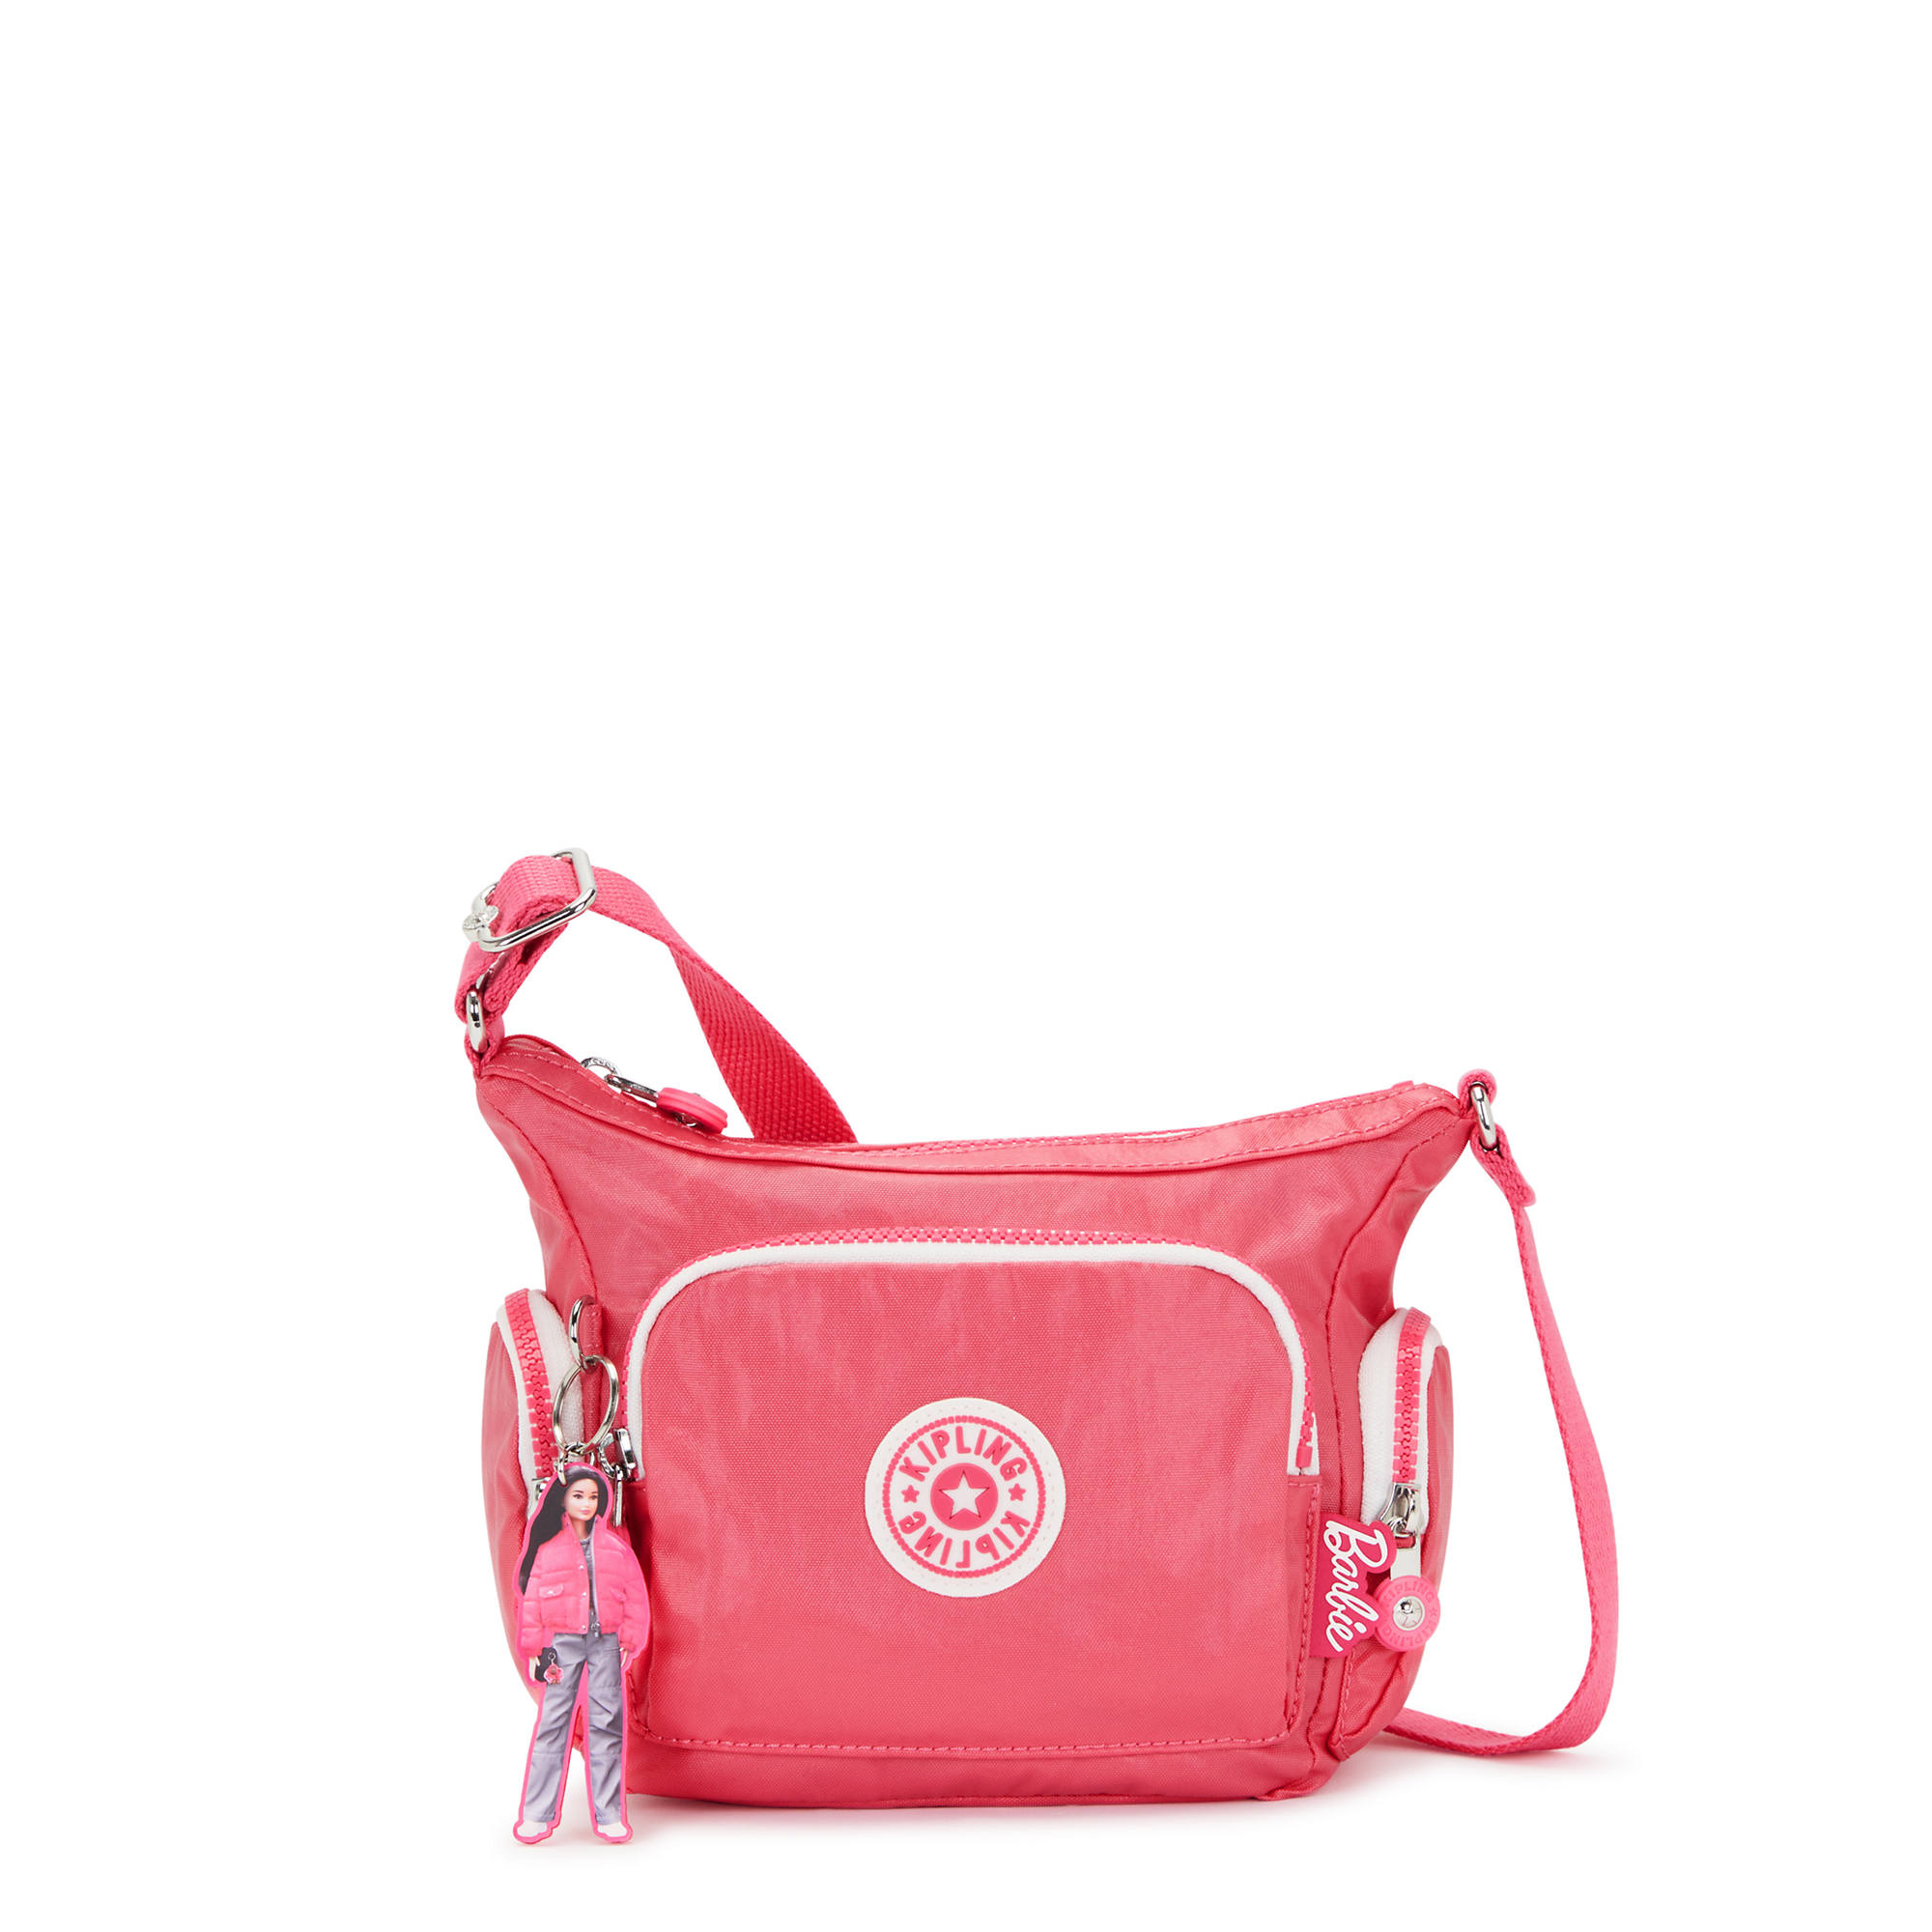 Handbag Idealo Messenger Bags Kipling, bag, luggage Bags, leather,  accessories png | PNGWing